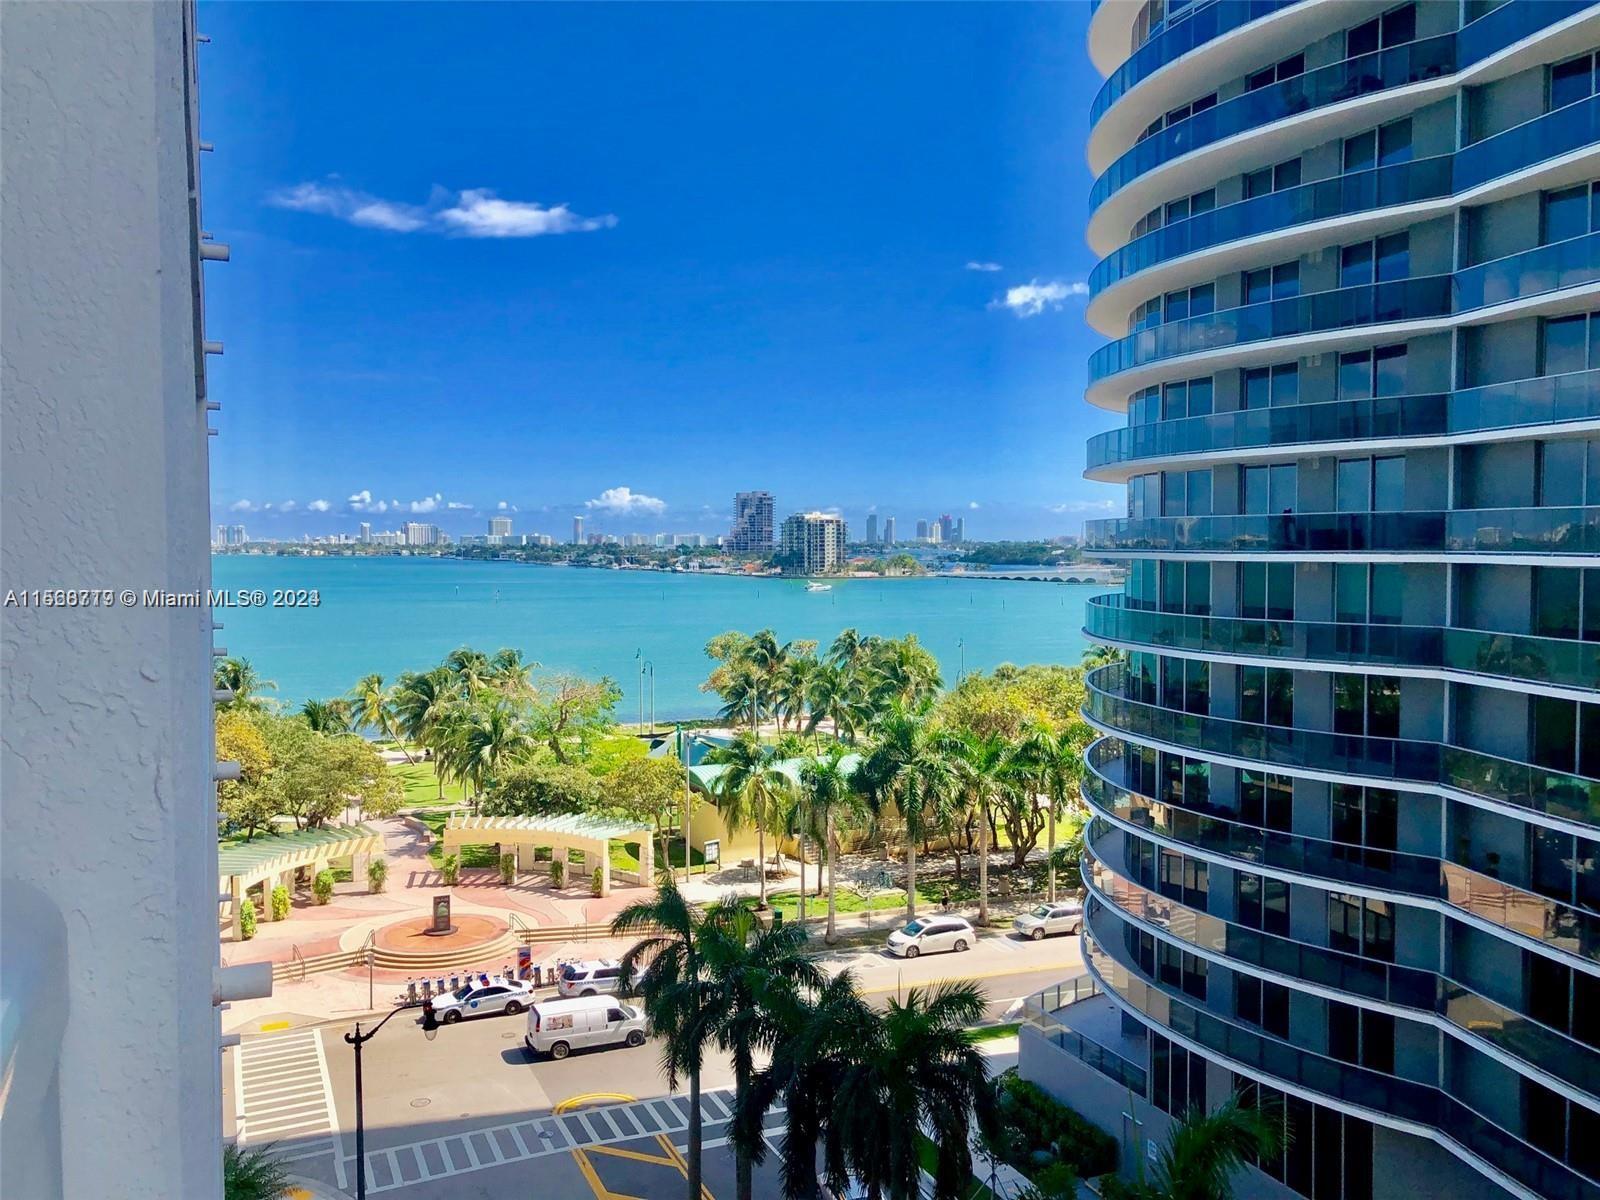 Enjoy both Bay & City views from this spacious 2 Bedroom 2 baths w/1430 sqft of AC space + 236 sqft in balconies. Split bedrooms. Full size washer/dryer. storage Plenty of storage space. Cable, internet, water & 1 parking space (others available for +) included in low HOA. Heated Pool, State of the Art Gym Business Center, Game Rm all w spectacular views of the Bay. Located across from Margaret Pace Park & within walking distance to public transportation, restaurants, banking & Publix. Miami’s best restaurants, entertainment & sports events are just minutes away. Very easy to show call now!